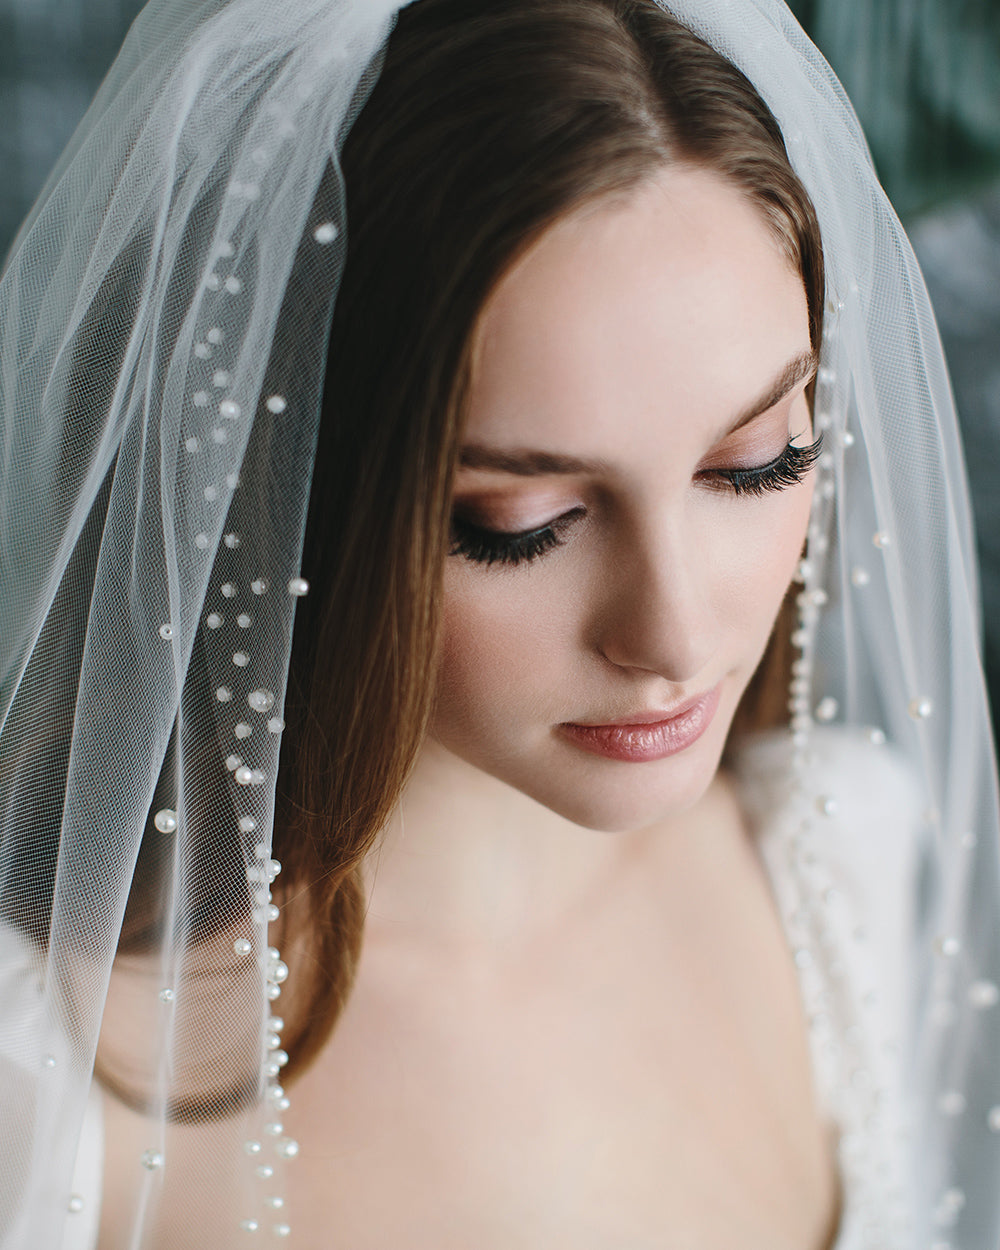 Pearl Veil  Wedding Dresses, Veils, and Capes - Grace + Ivory